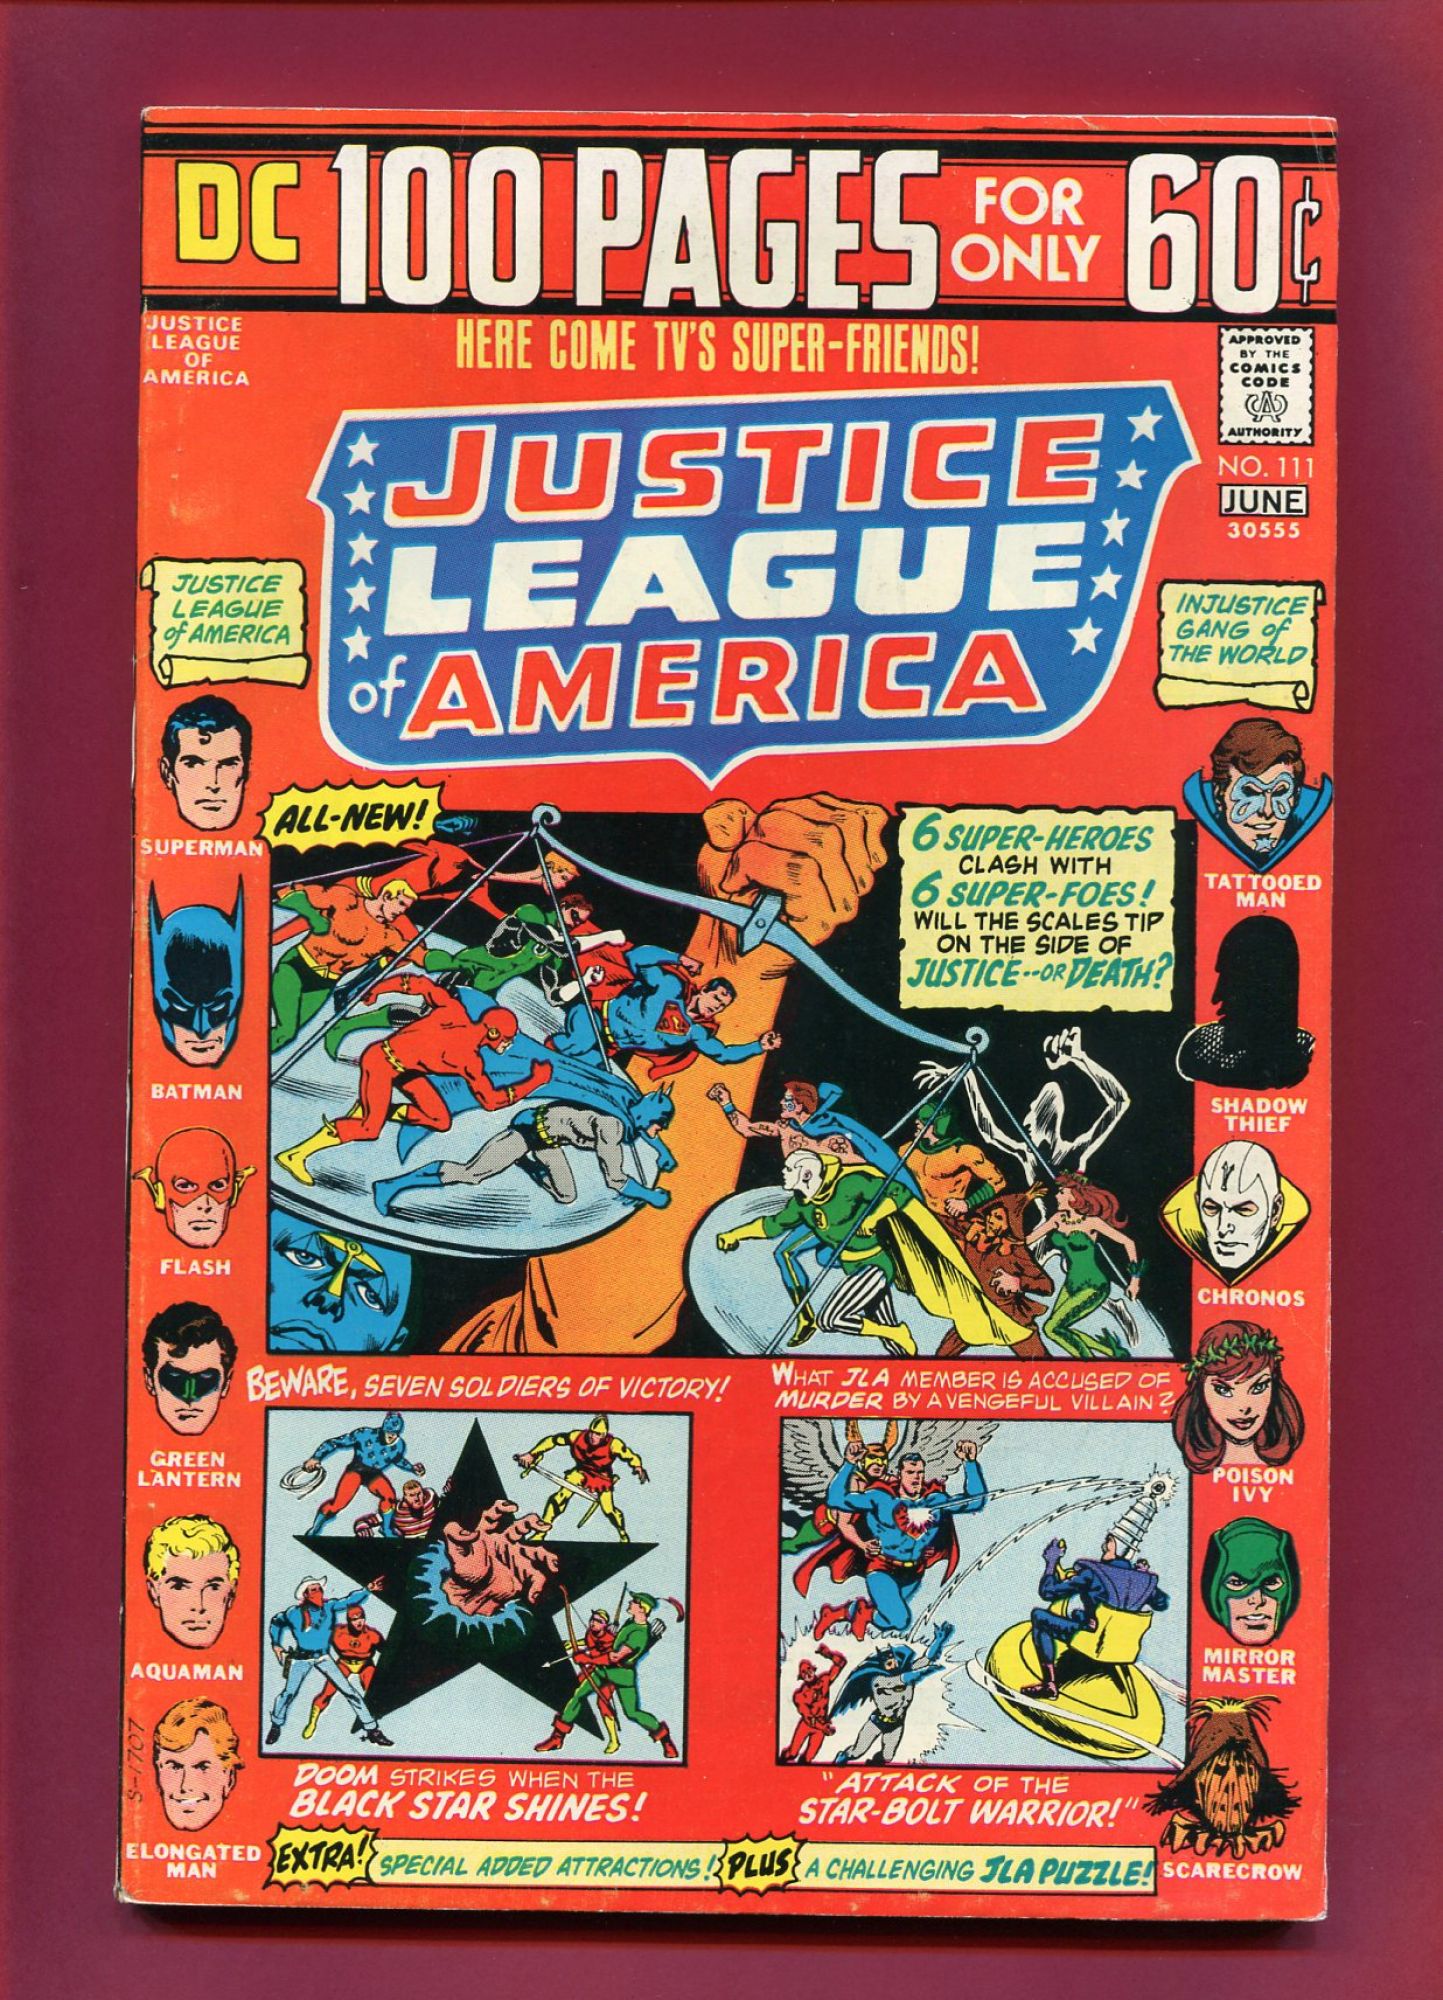 Justice League of America #111, May 1974, 7.0 FN/VF